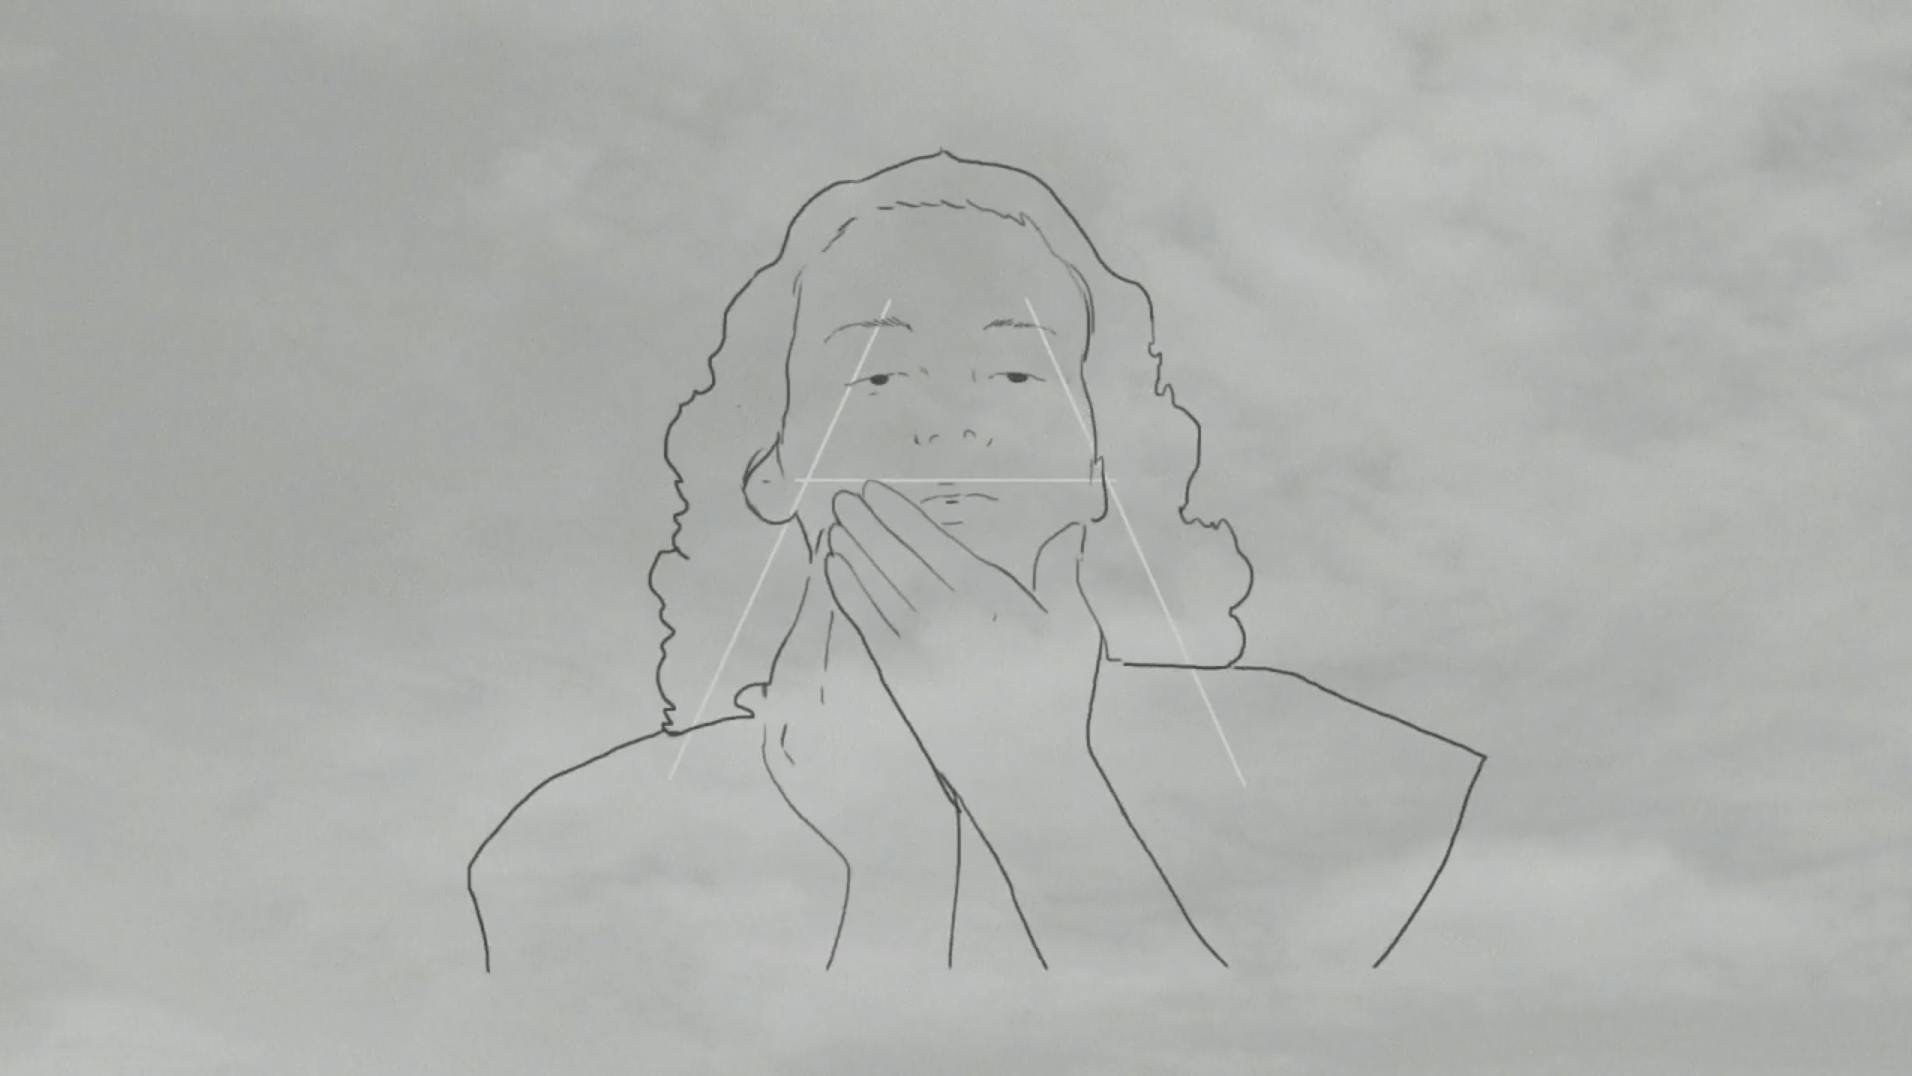 A line drawing of a woman touching her face against a background of clouds